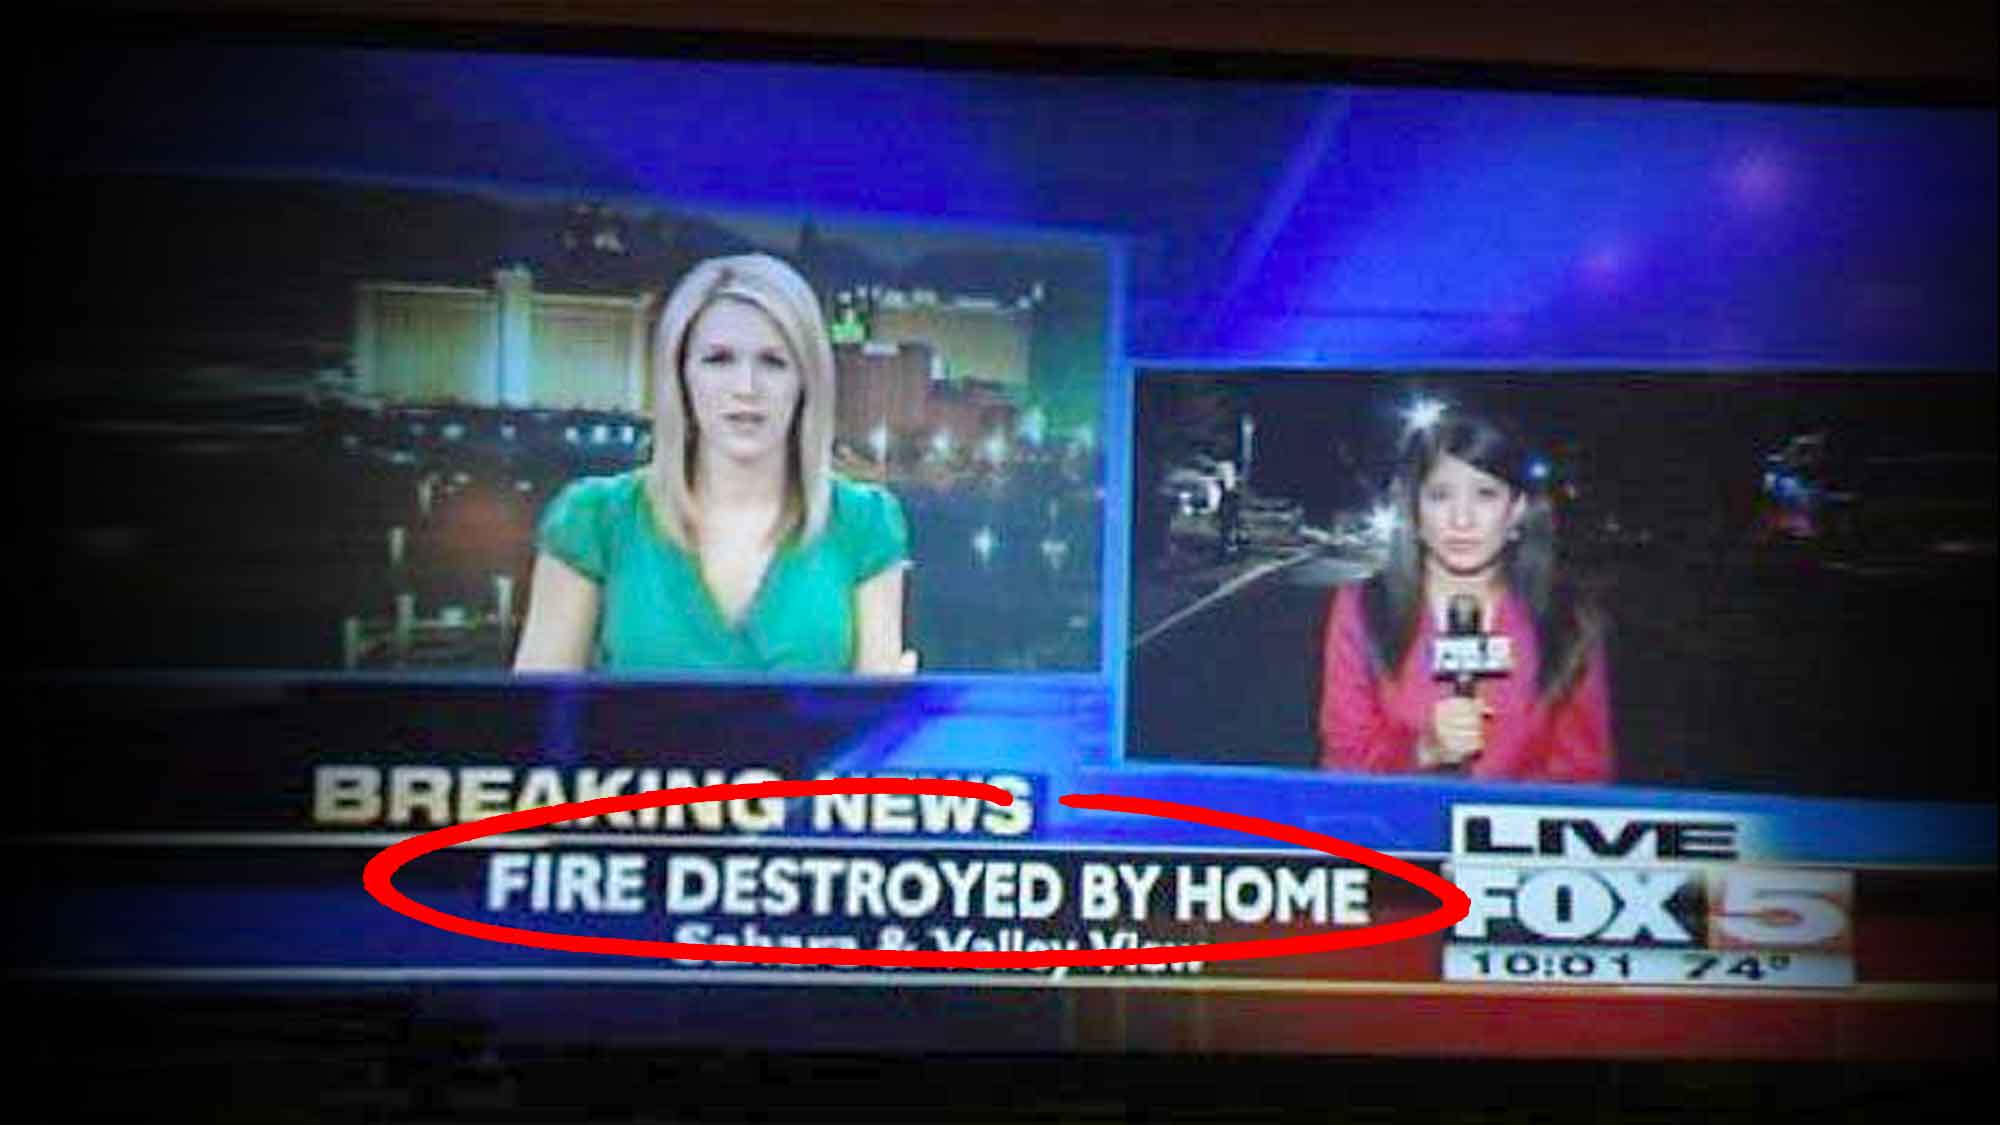 Funny Mistake By Graphic Designer At FOX News: Fire Destroyed By Home